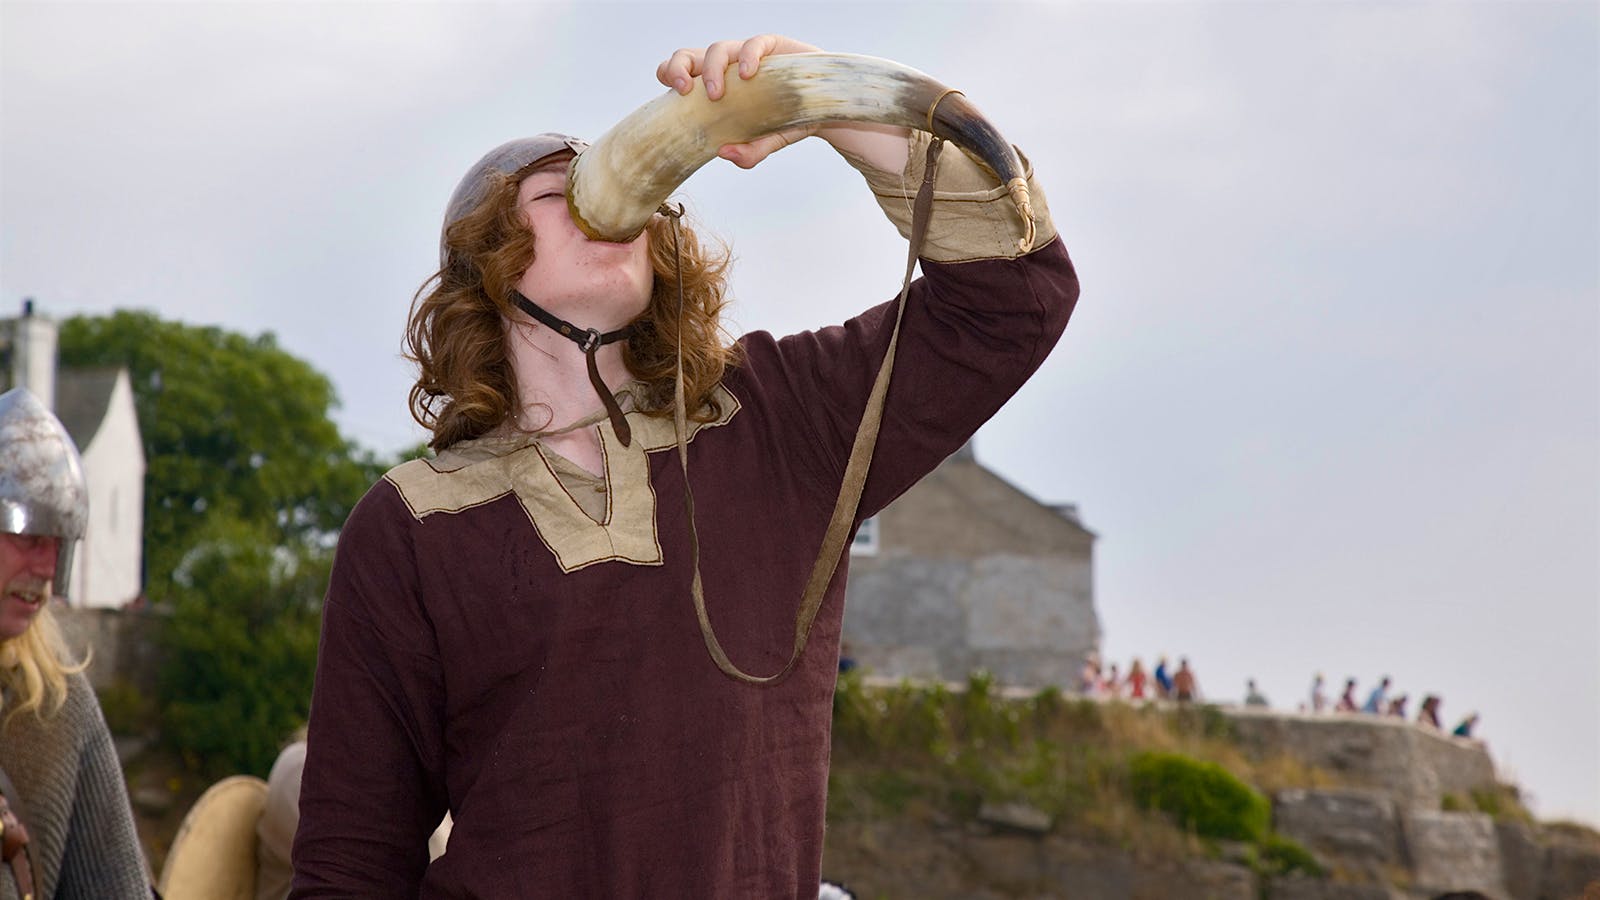 Cru on the Longship? Evidence Suggests Vikings Also Crushed Grapes